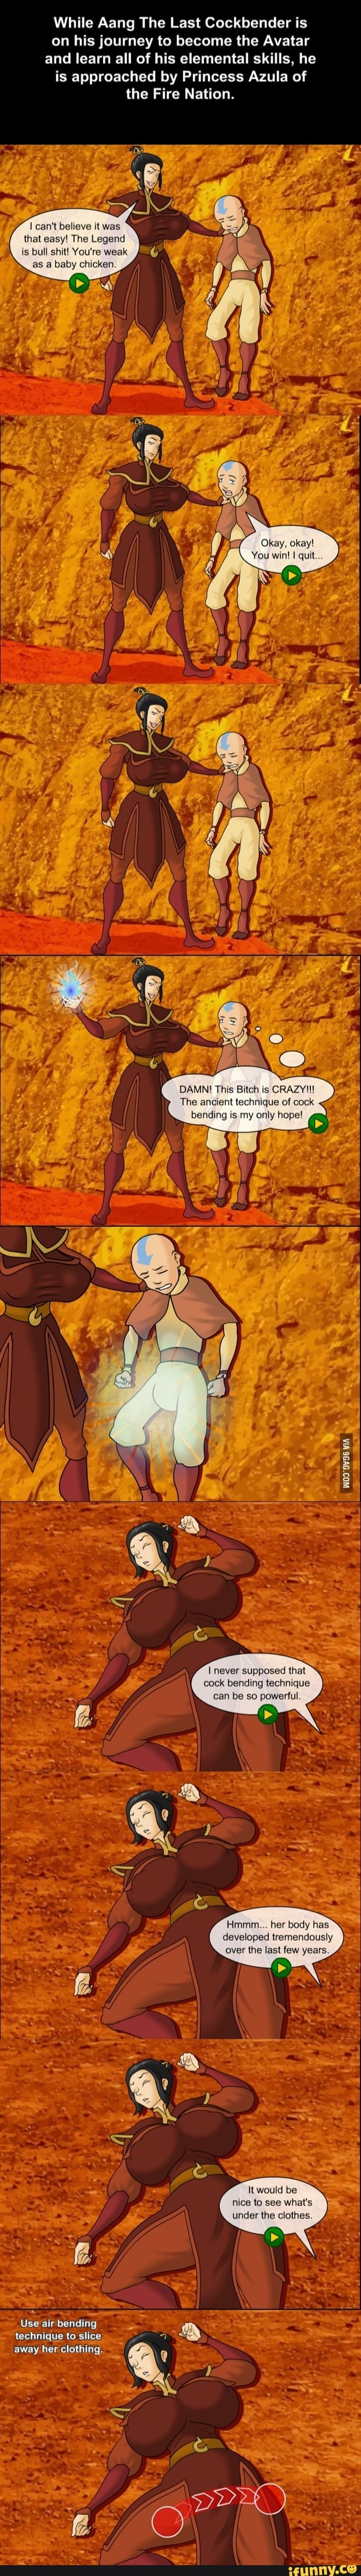 While Aang The Last Cockbender is on his journey to become the Avatar and  learn all